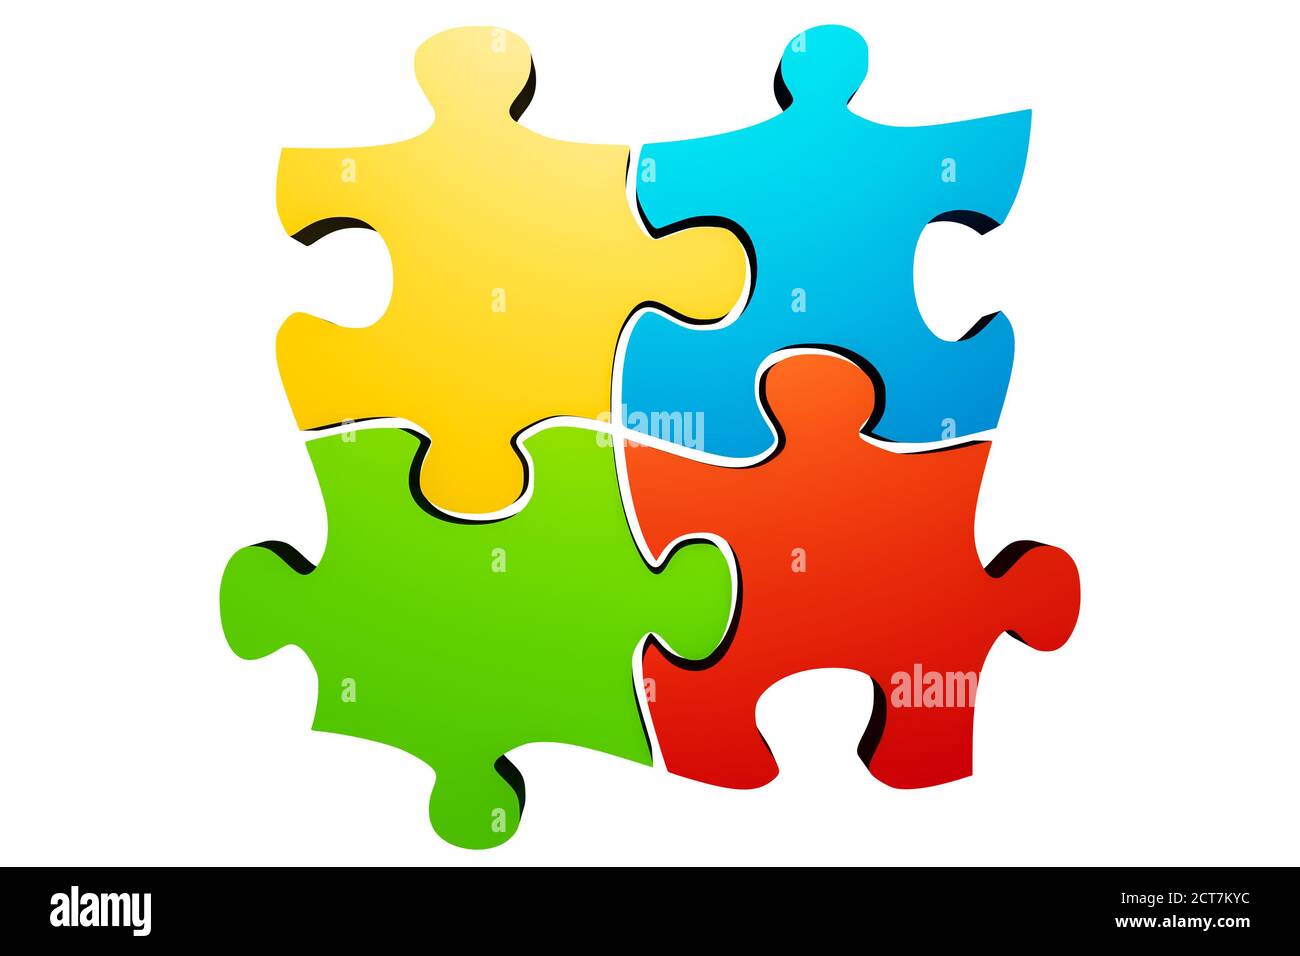 Connected colorful jigsaw puzzle parts or pieces isolated on a white background. Teamwork, team building, solidarity, synergy, collaboration, solution Stock Photo